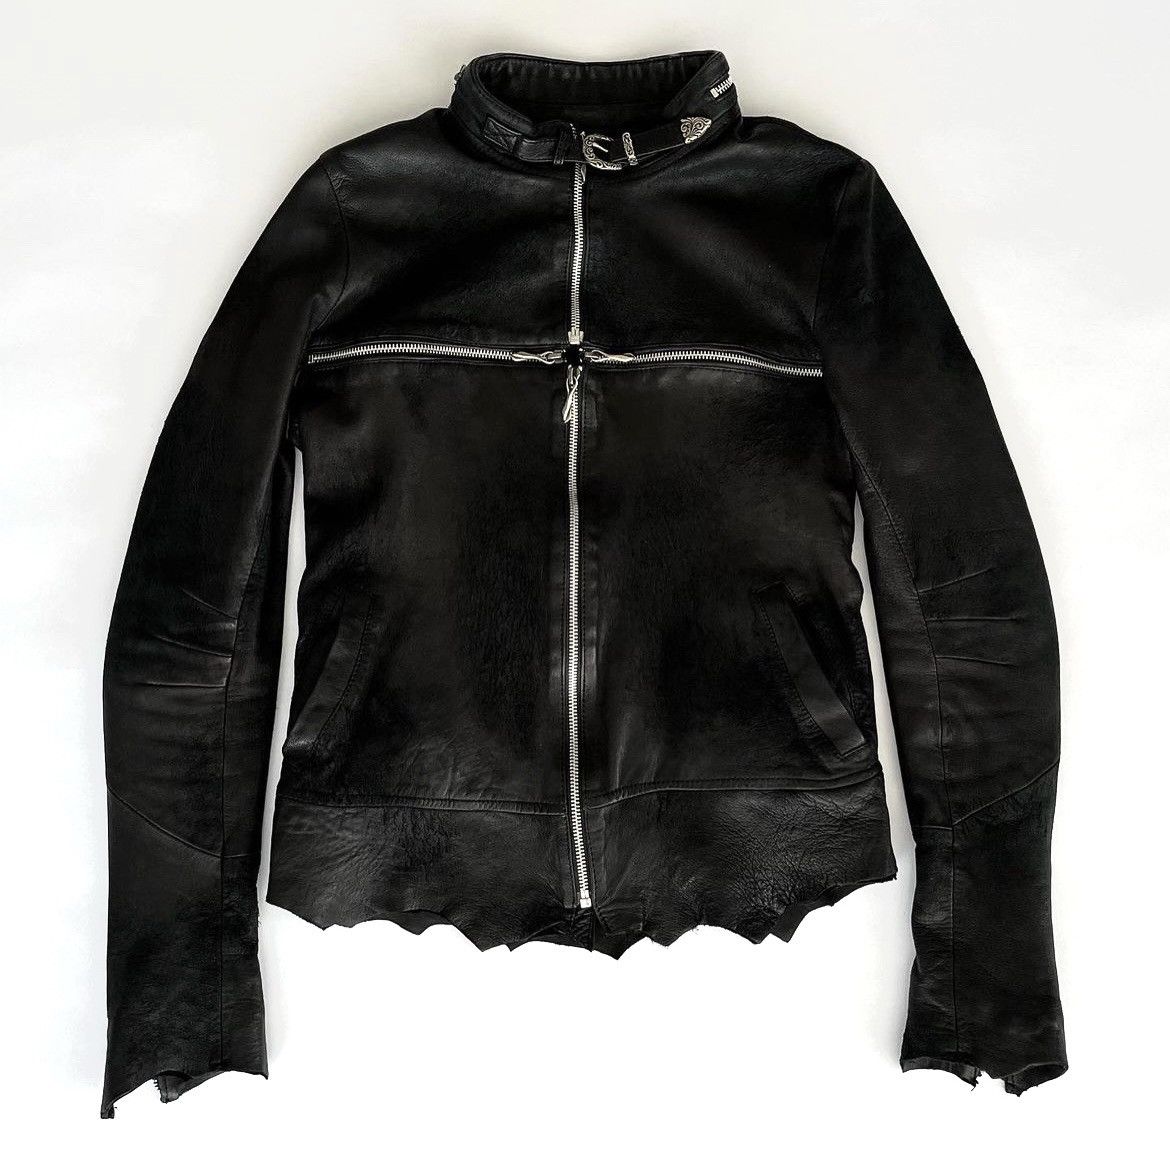 14th Addiction Cross Zipper Distressed Leather Jacket | Grailed